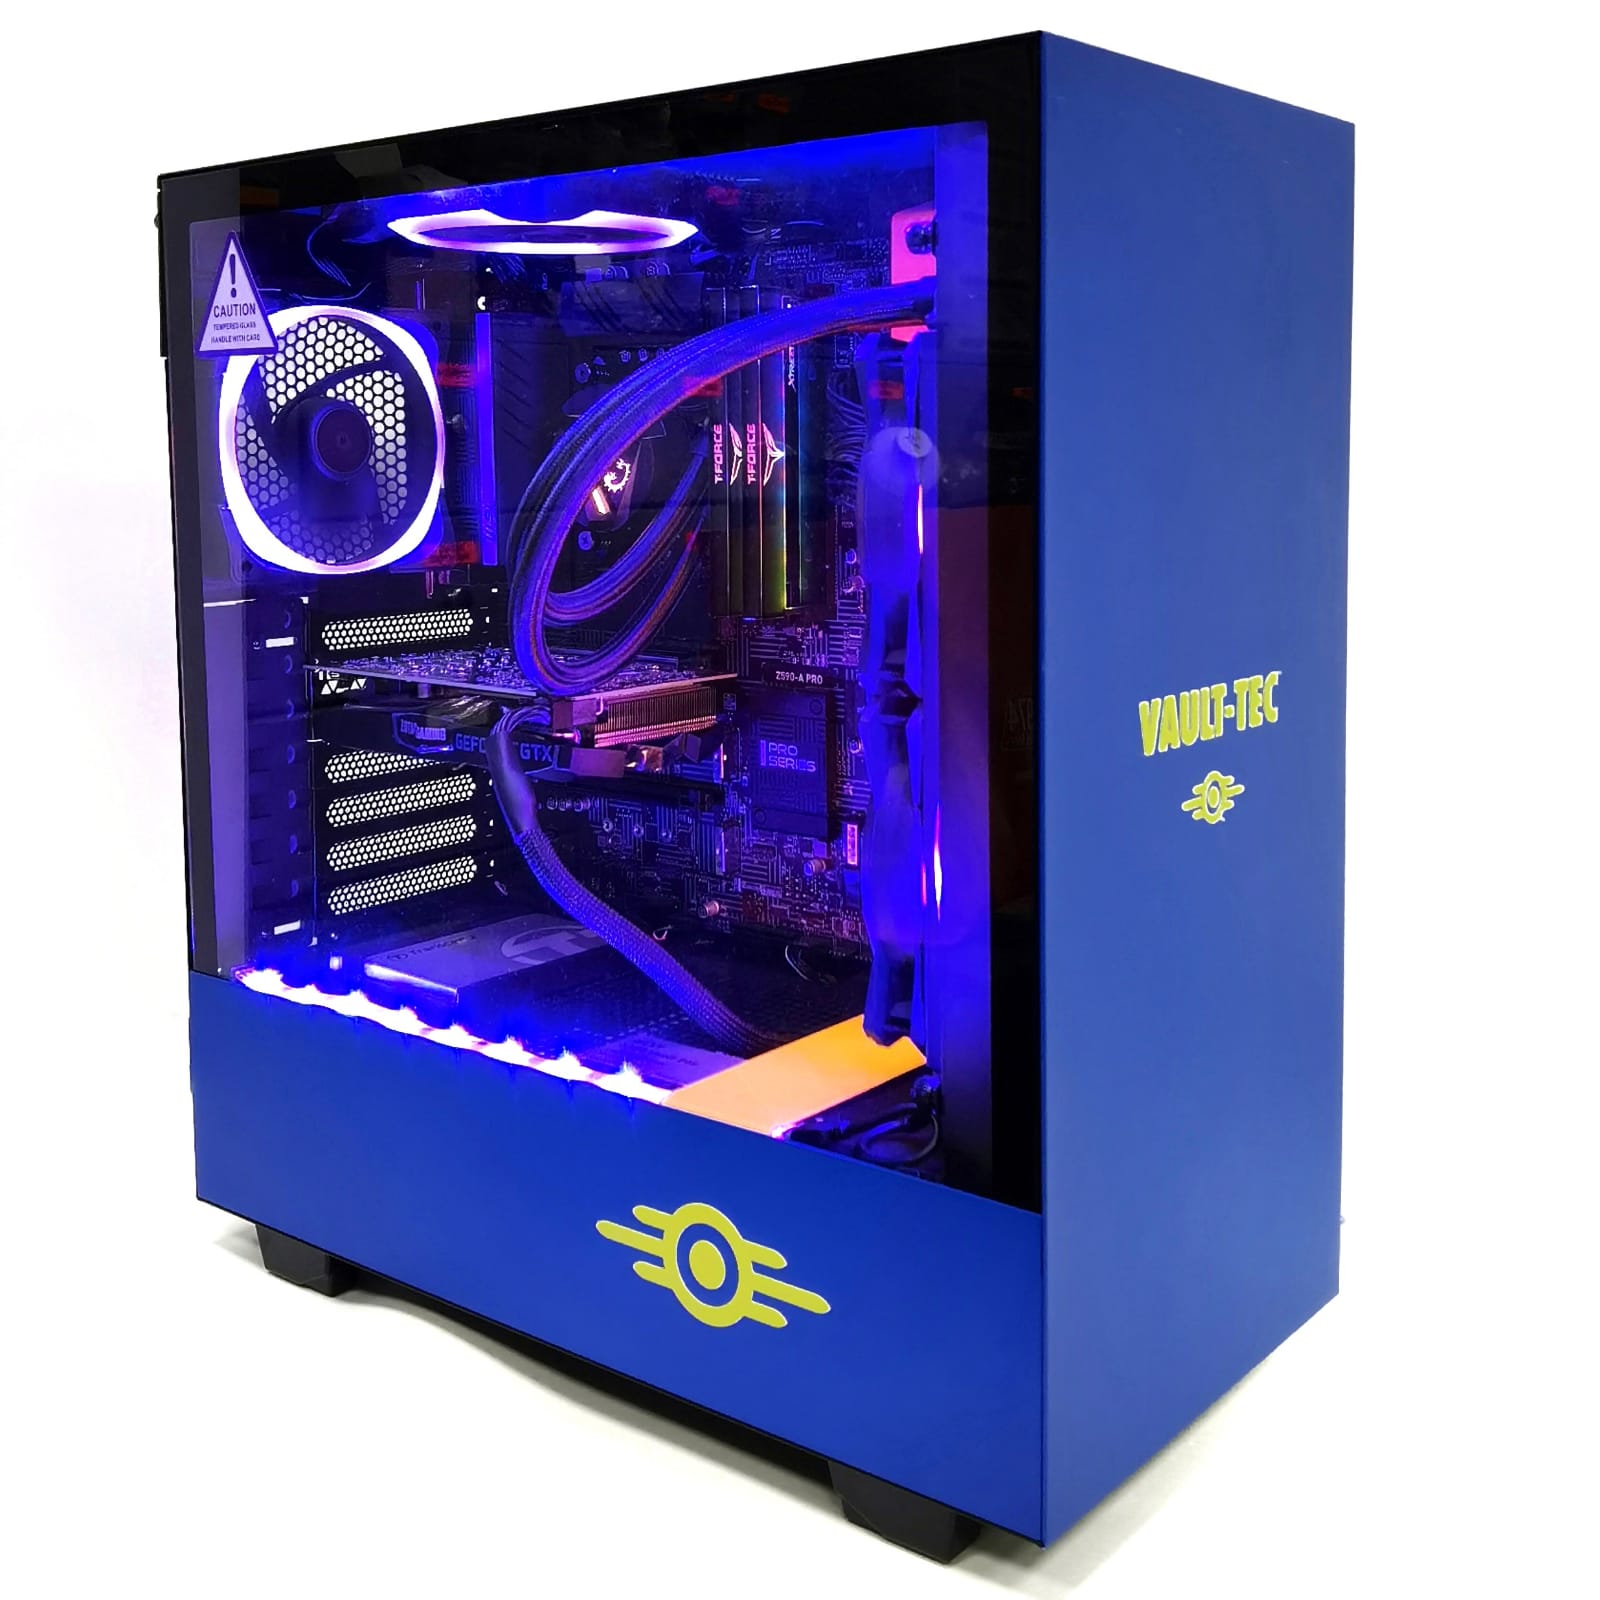 (Pre-Owned) Gaming PC Intel i7-11700KF w/ Zotac 1660 Super & NZXT Vault Boy Limited Edition - Store 974 | ستور ٩٧٤